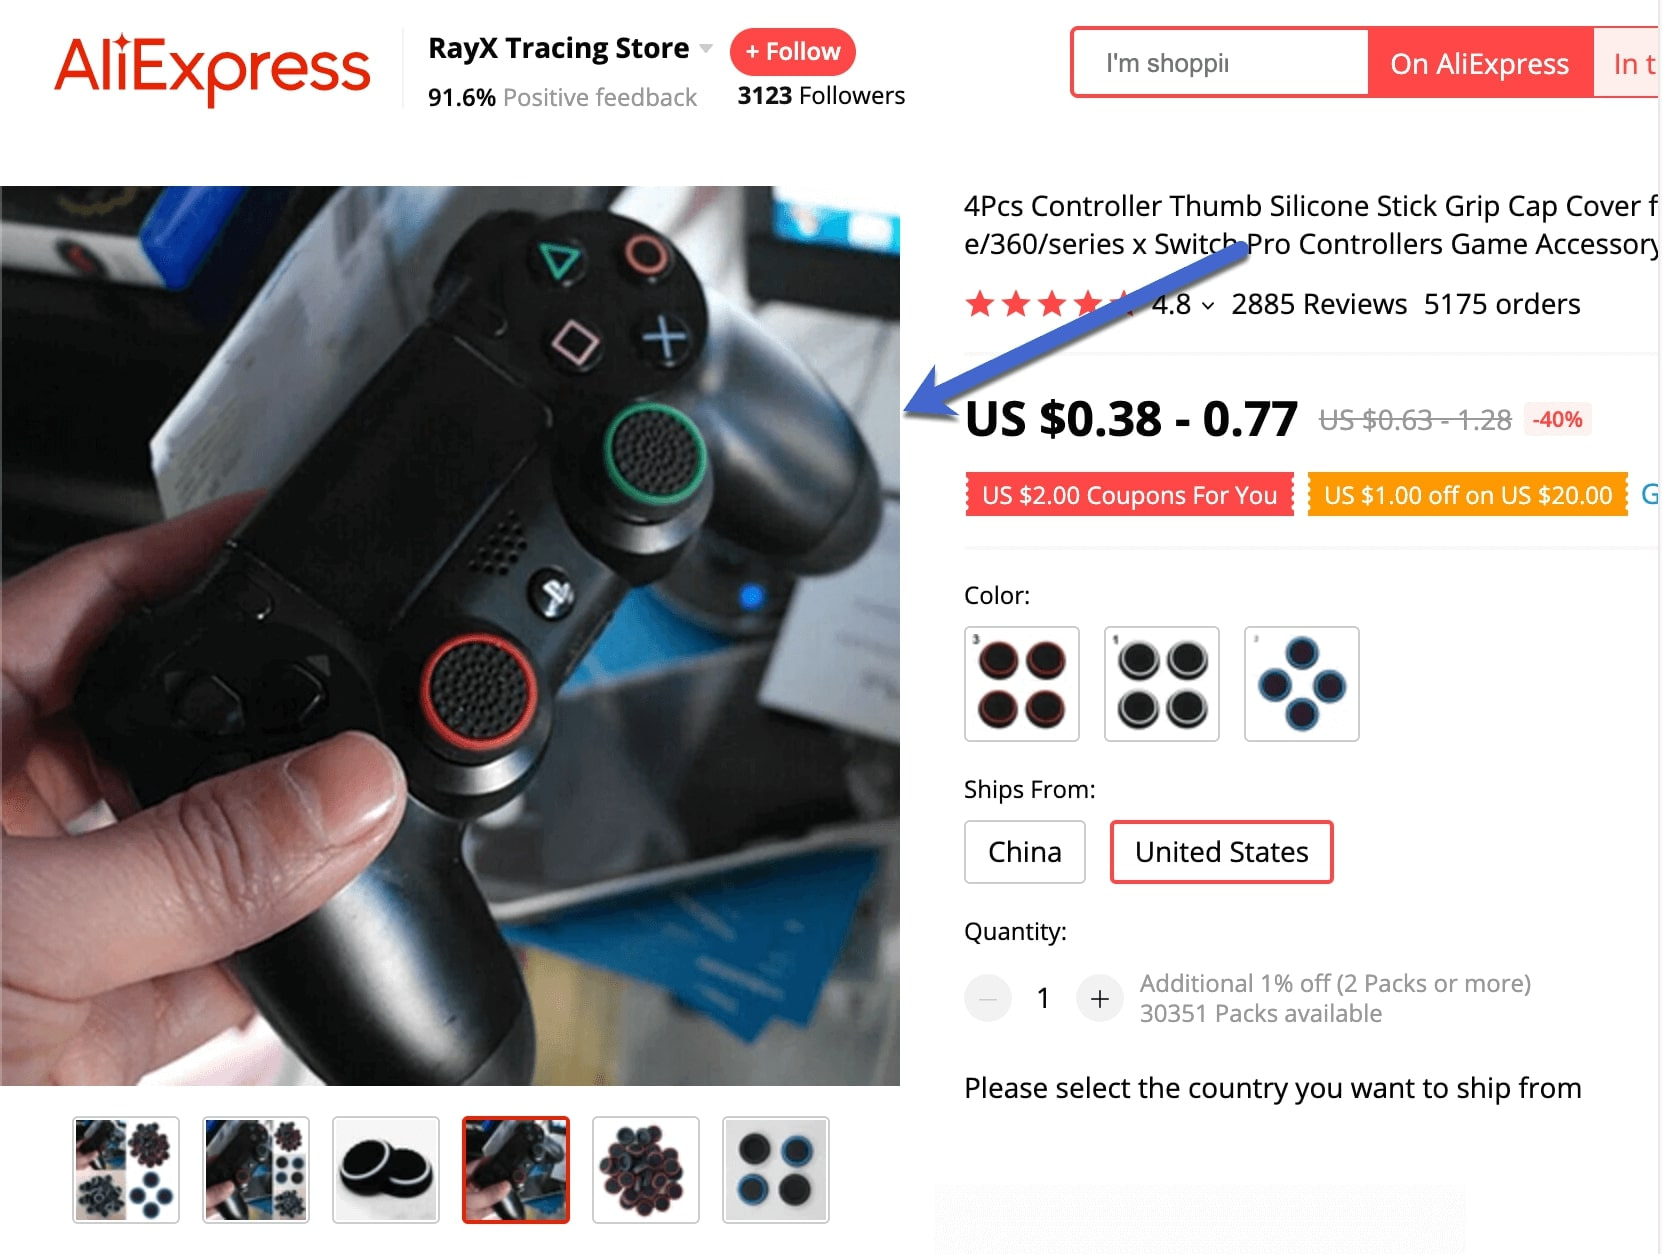 aliexpress product photos that don't look good